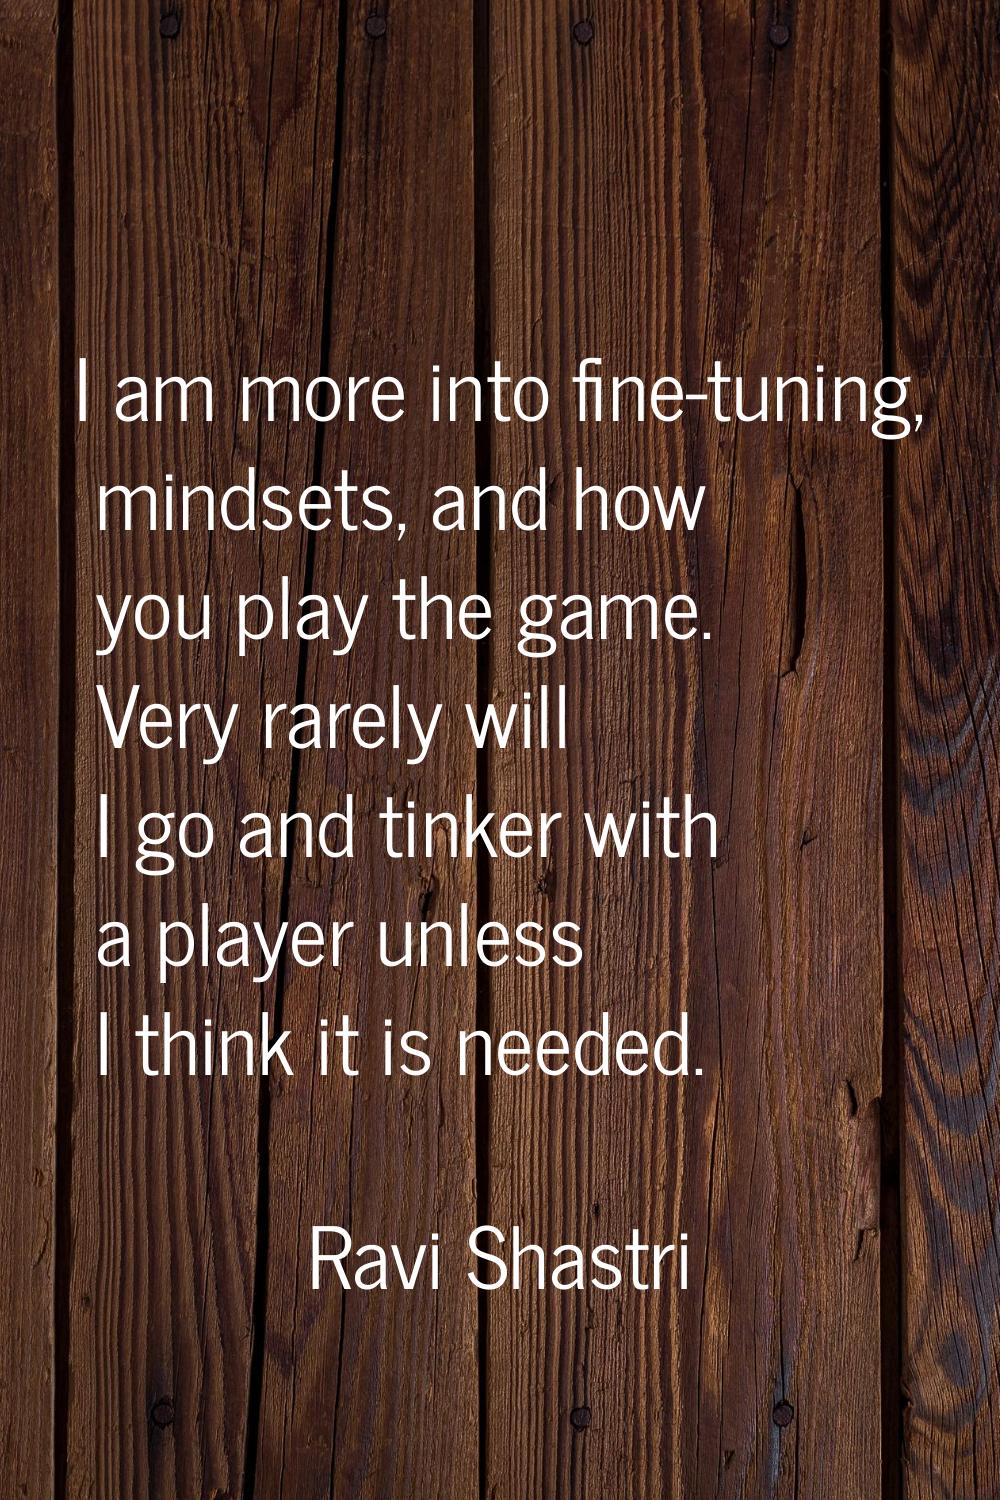 I am more into fine-tuning, mindsets, and how you play the game. Very rarely will I go and tinker w